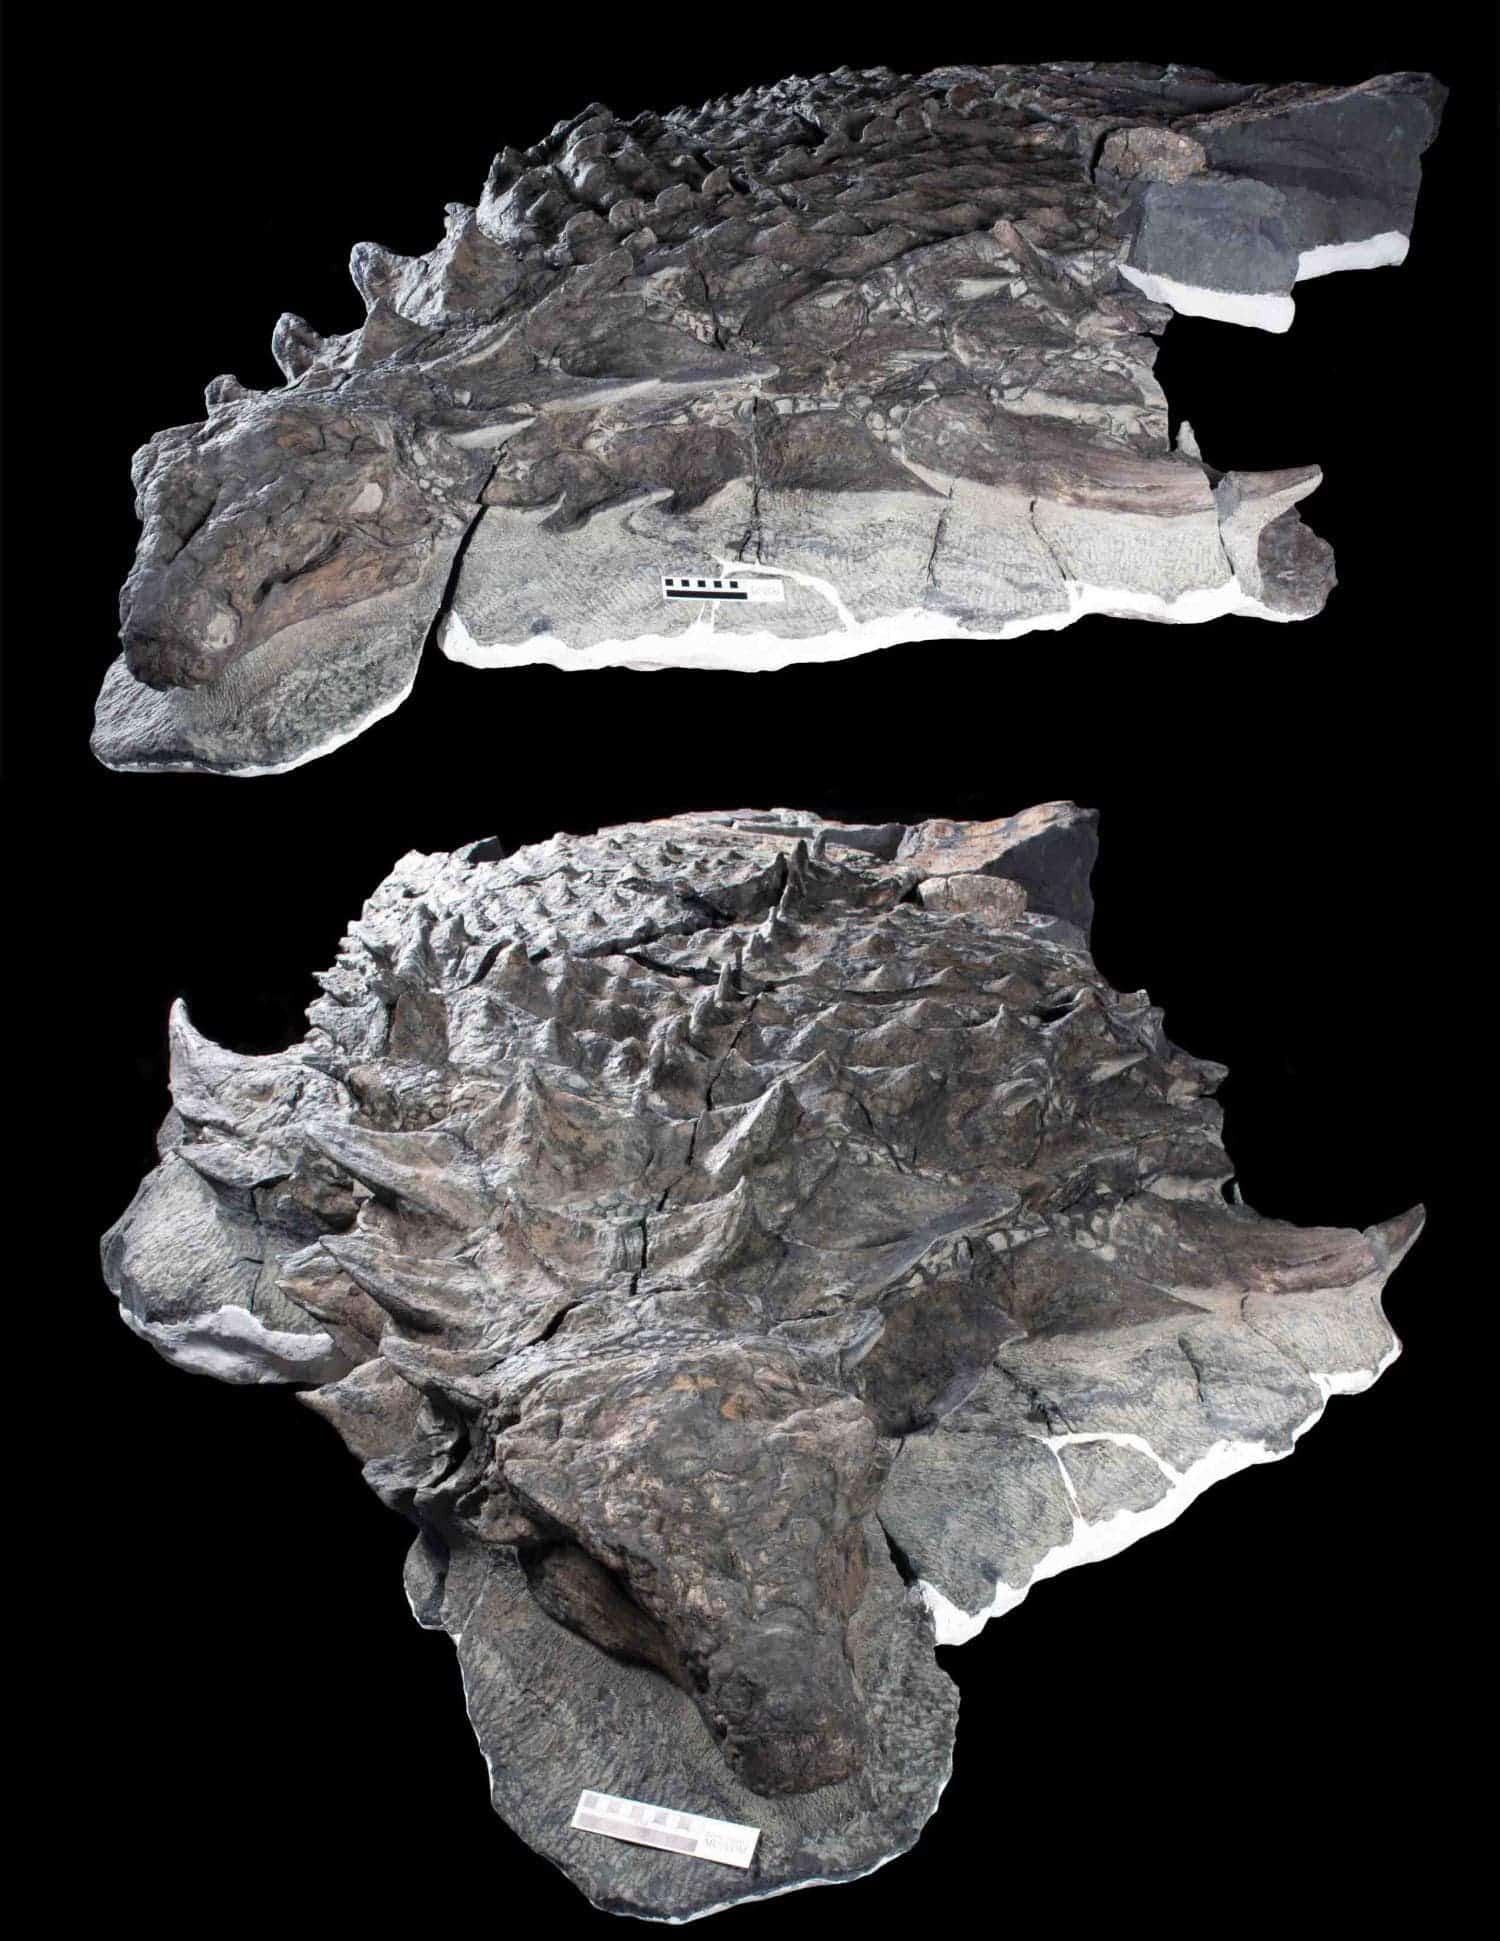 This beast had a lot of armor. Scale bar is 10 cm / 4 in. 
Image credits Royal Tyrrell Museum of Palaeontology, Drumheller, Canada.